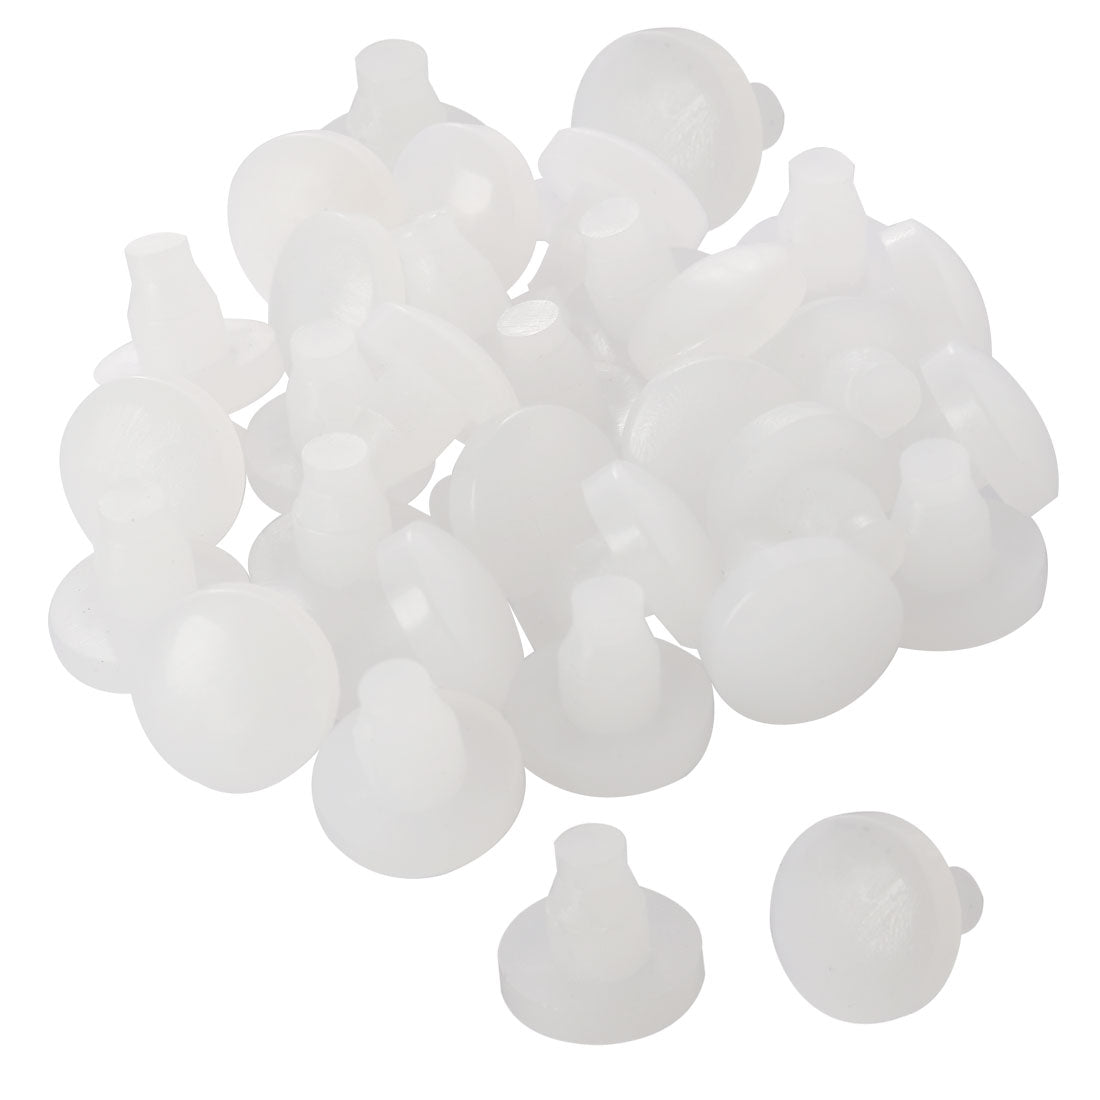 uxcell Uxcell 32pcs 7mm White Stem Bumpers Glide, Patio Outdoor Furniture Glass Table Top Anti-collision Embedded